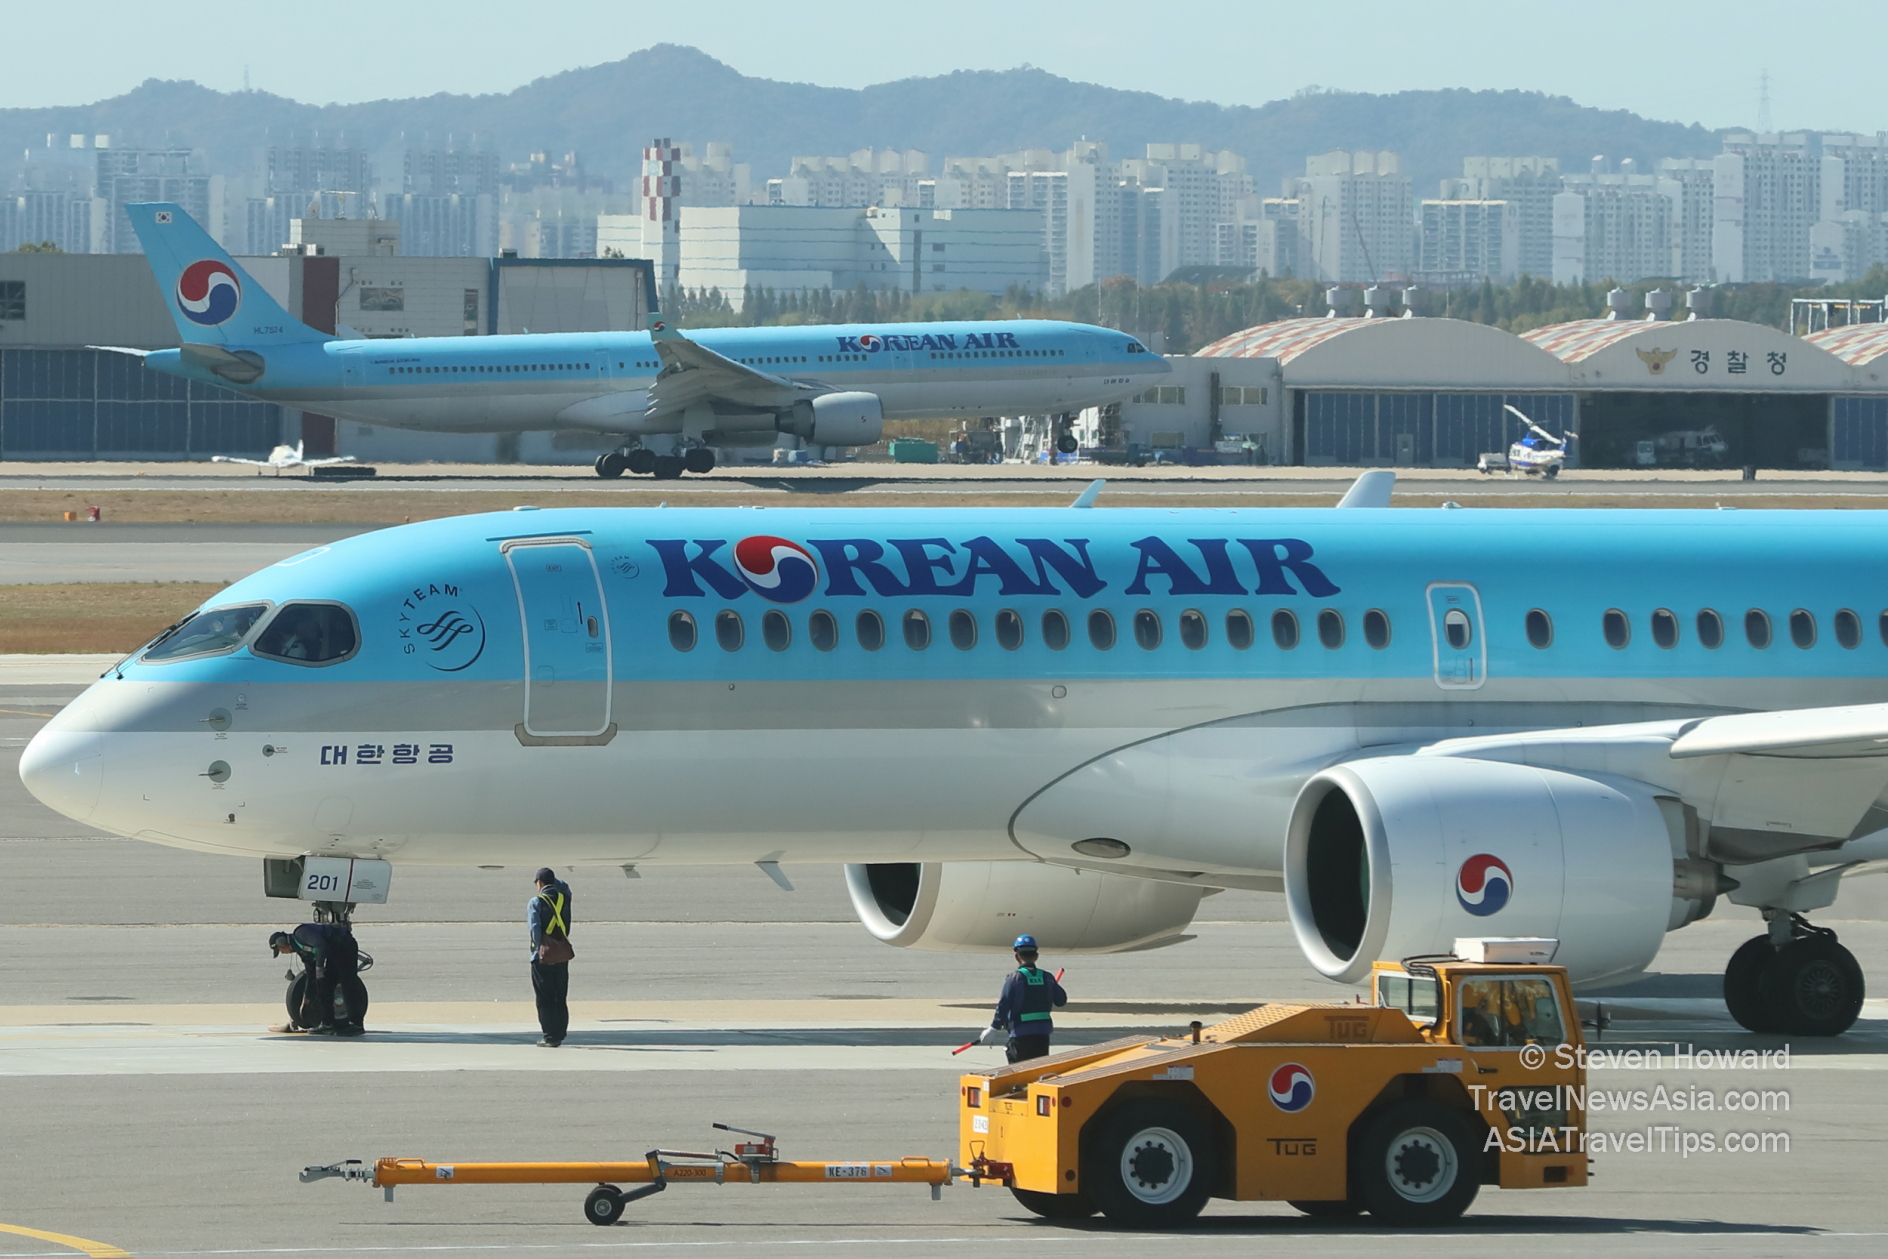 Korean Air A220 and A330 aircraft. Picture by Steven Howard of TravelNewsAsia.com Click to enlarge.